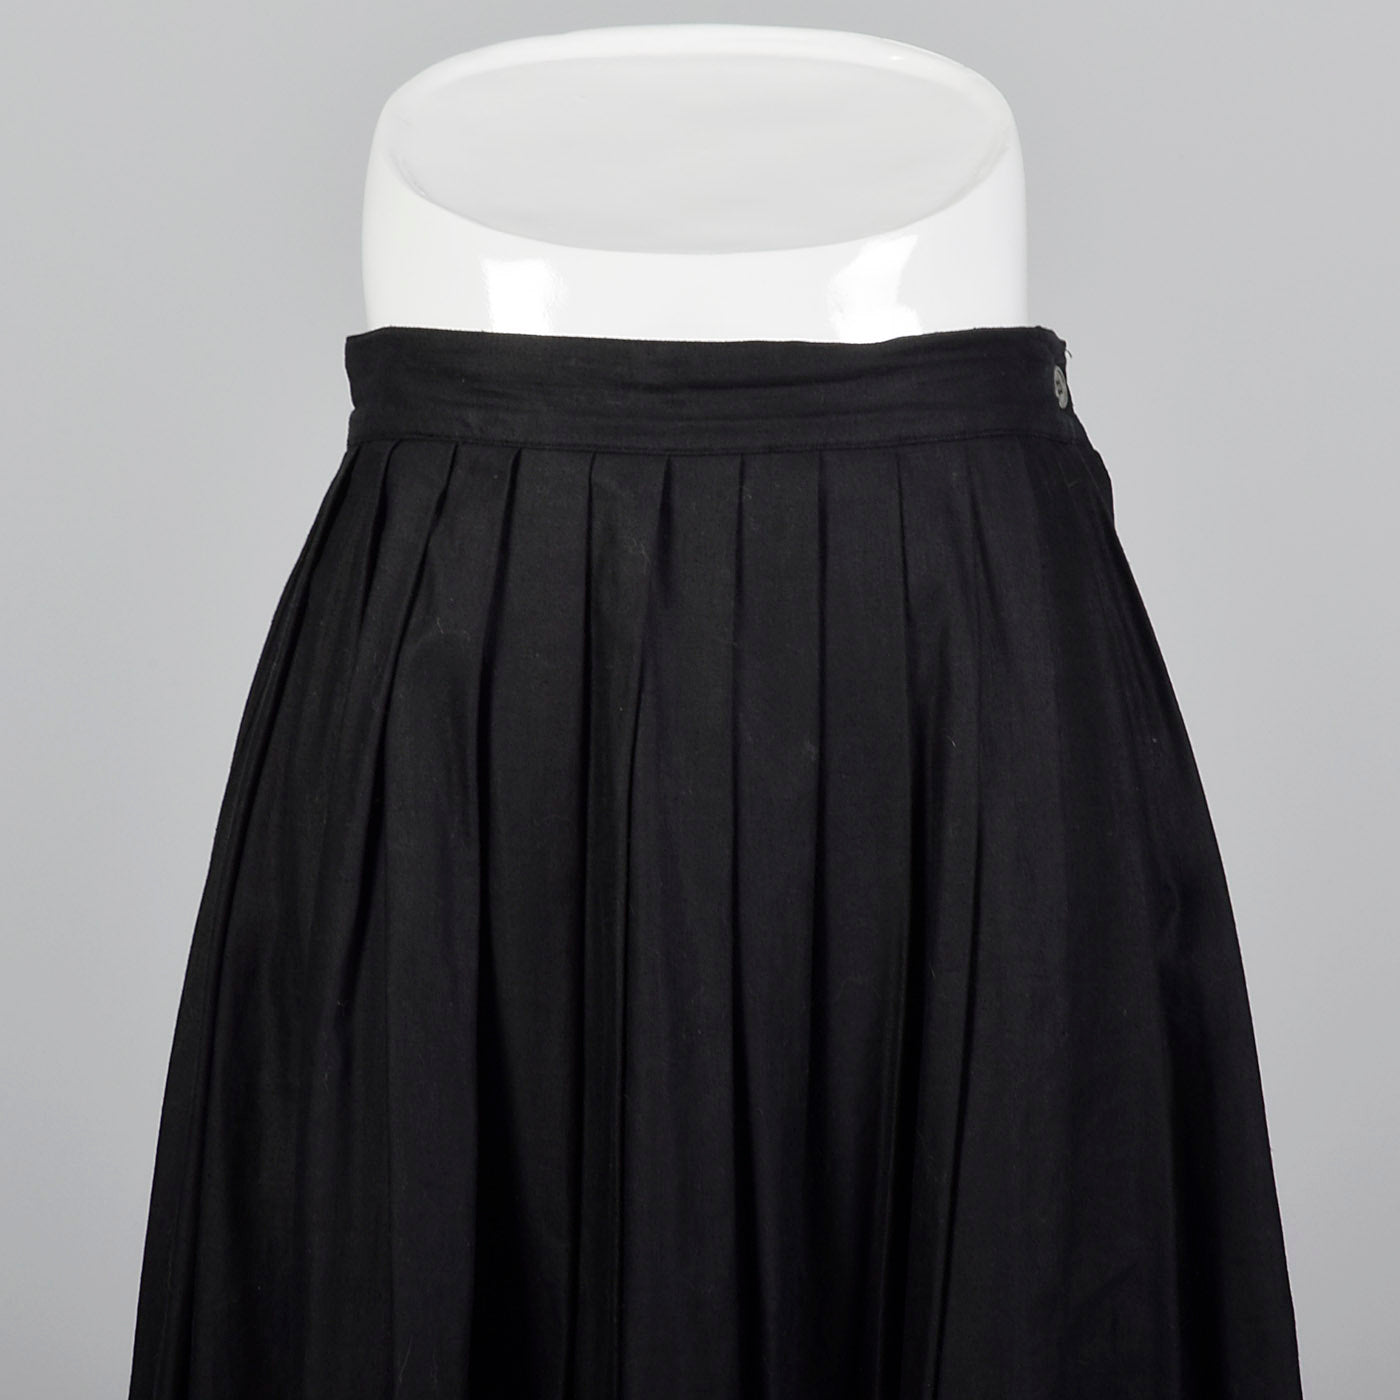 1990s Anne Klein A Line Black Skirt with Embroidered Border